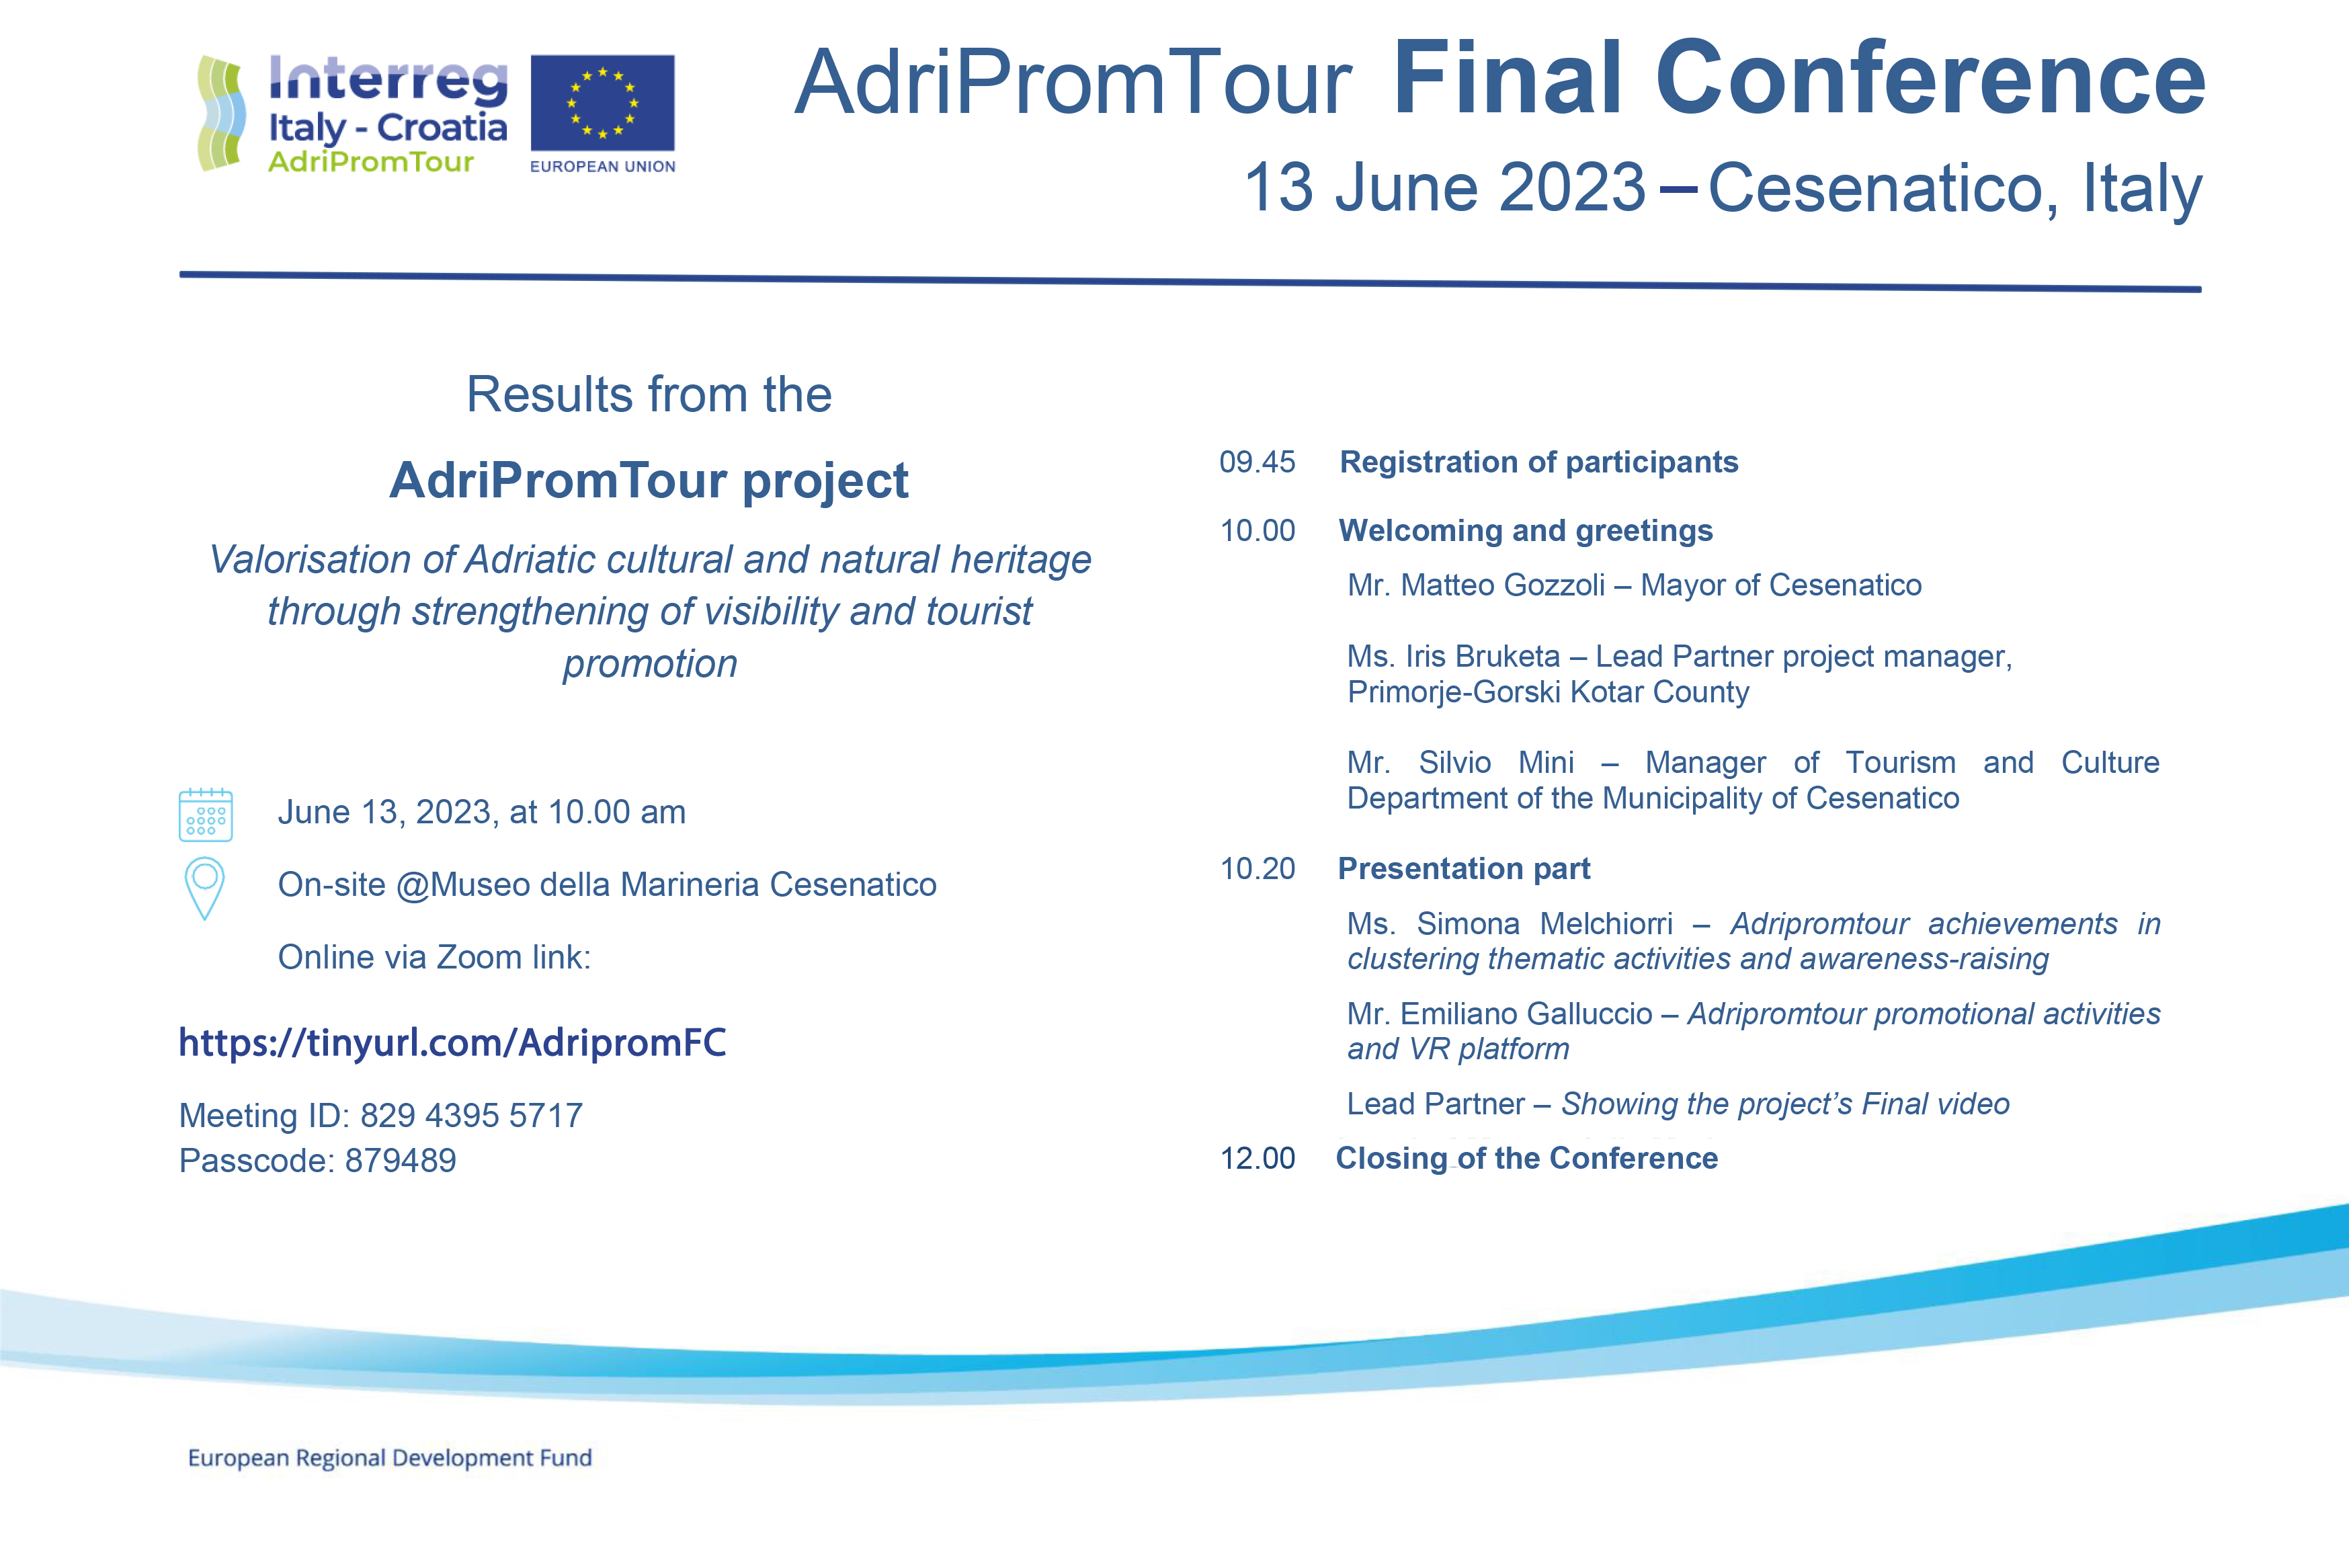 Adripromtour final conference in Cesenatico... and online